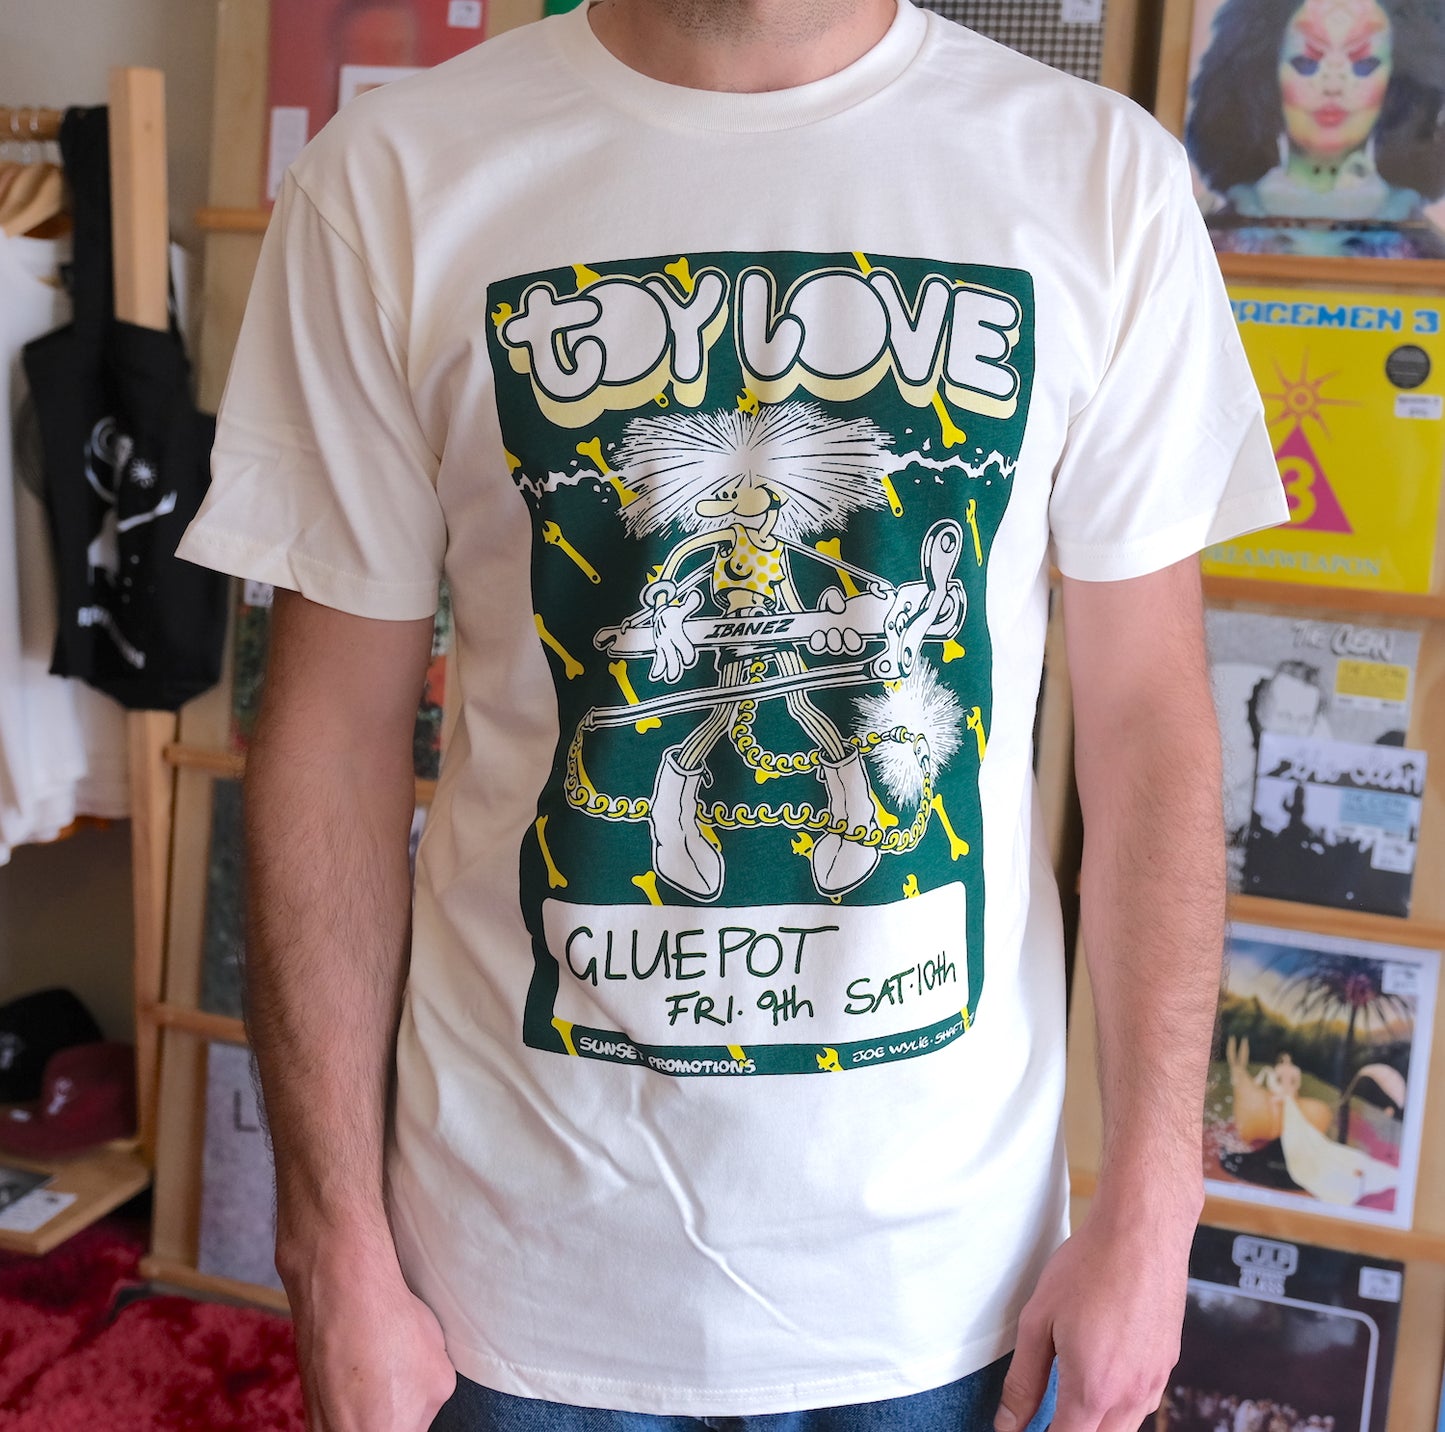 Toy Love Band T-Shirt by Joe Wylie I NZ Music & Band Merchandise